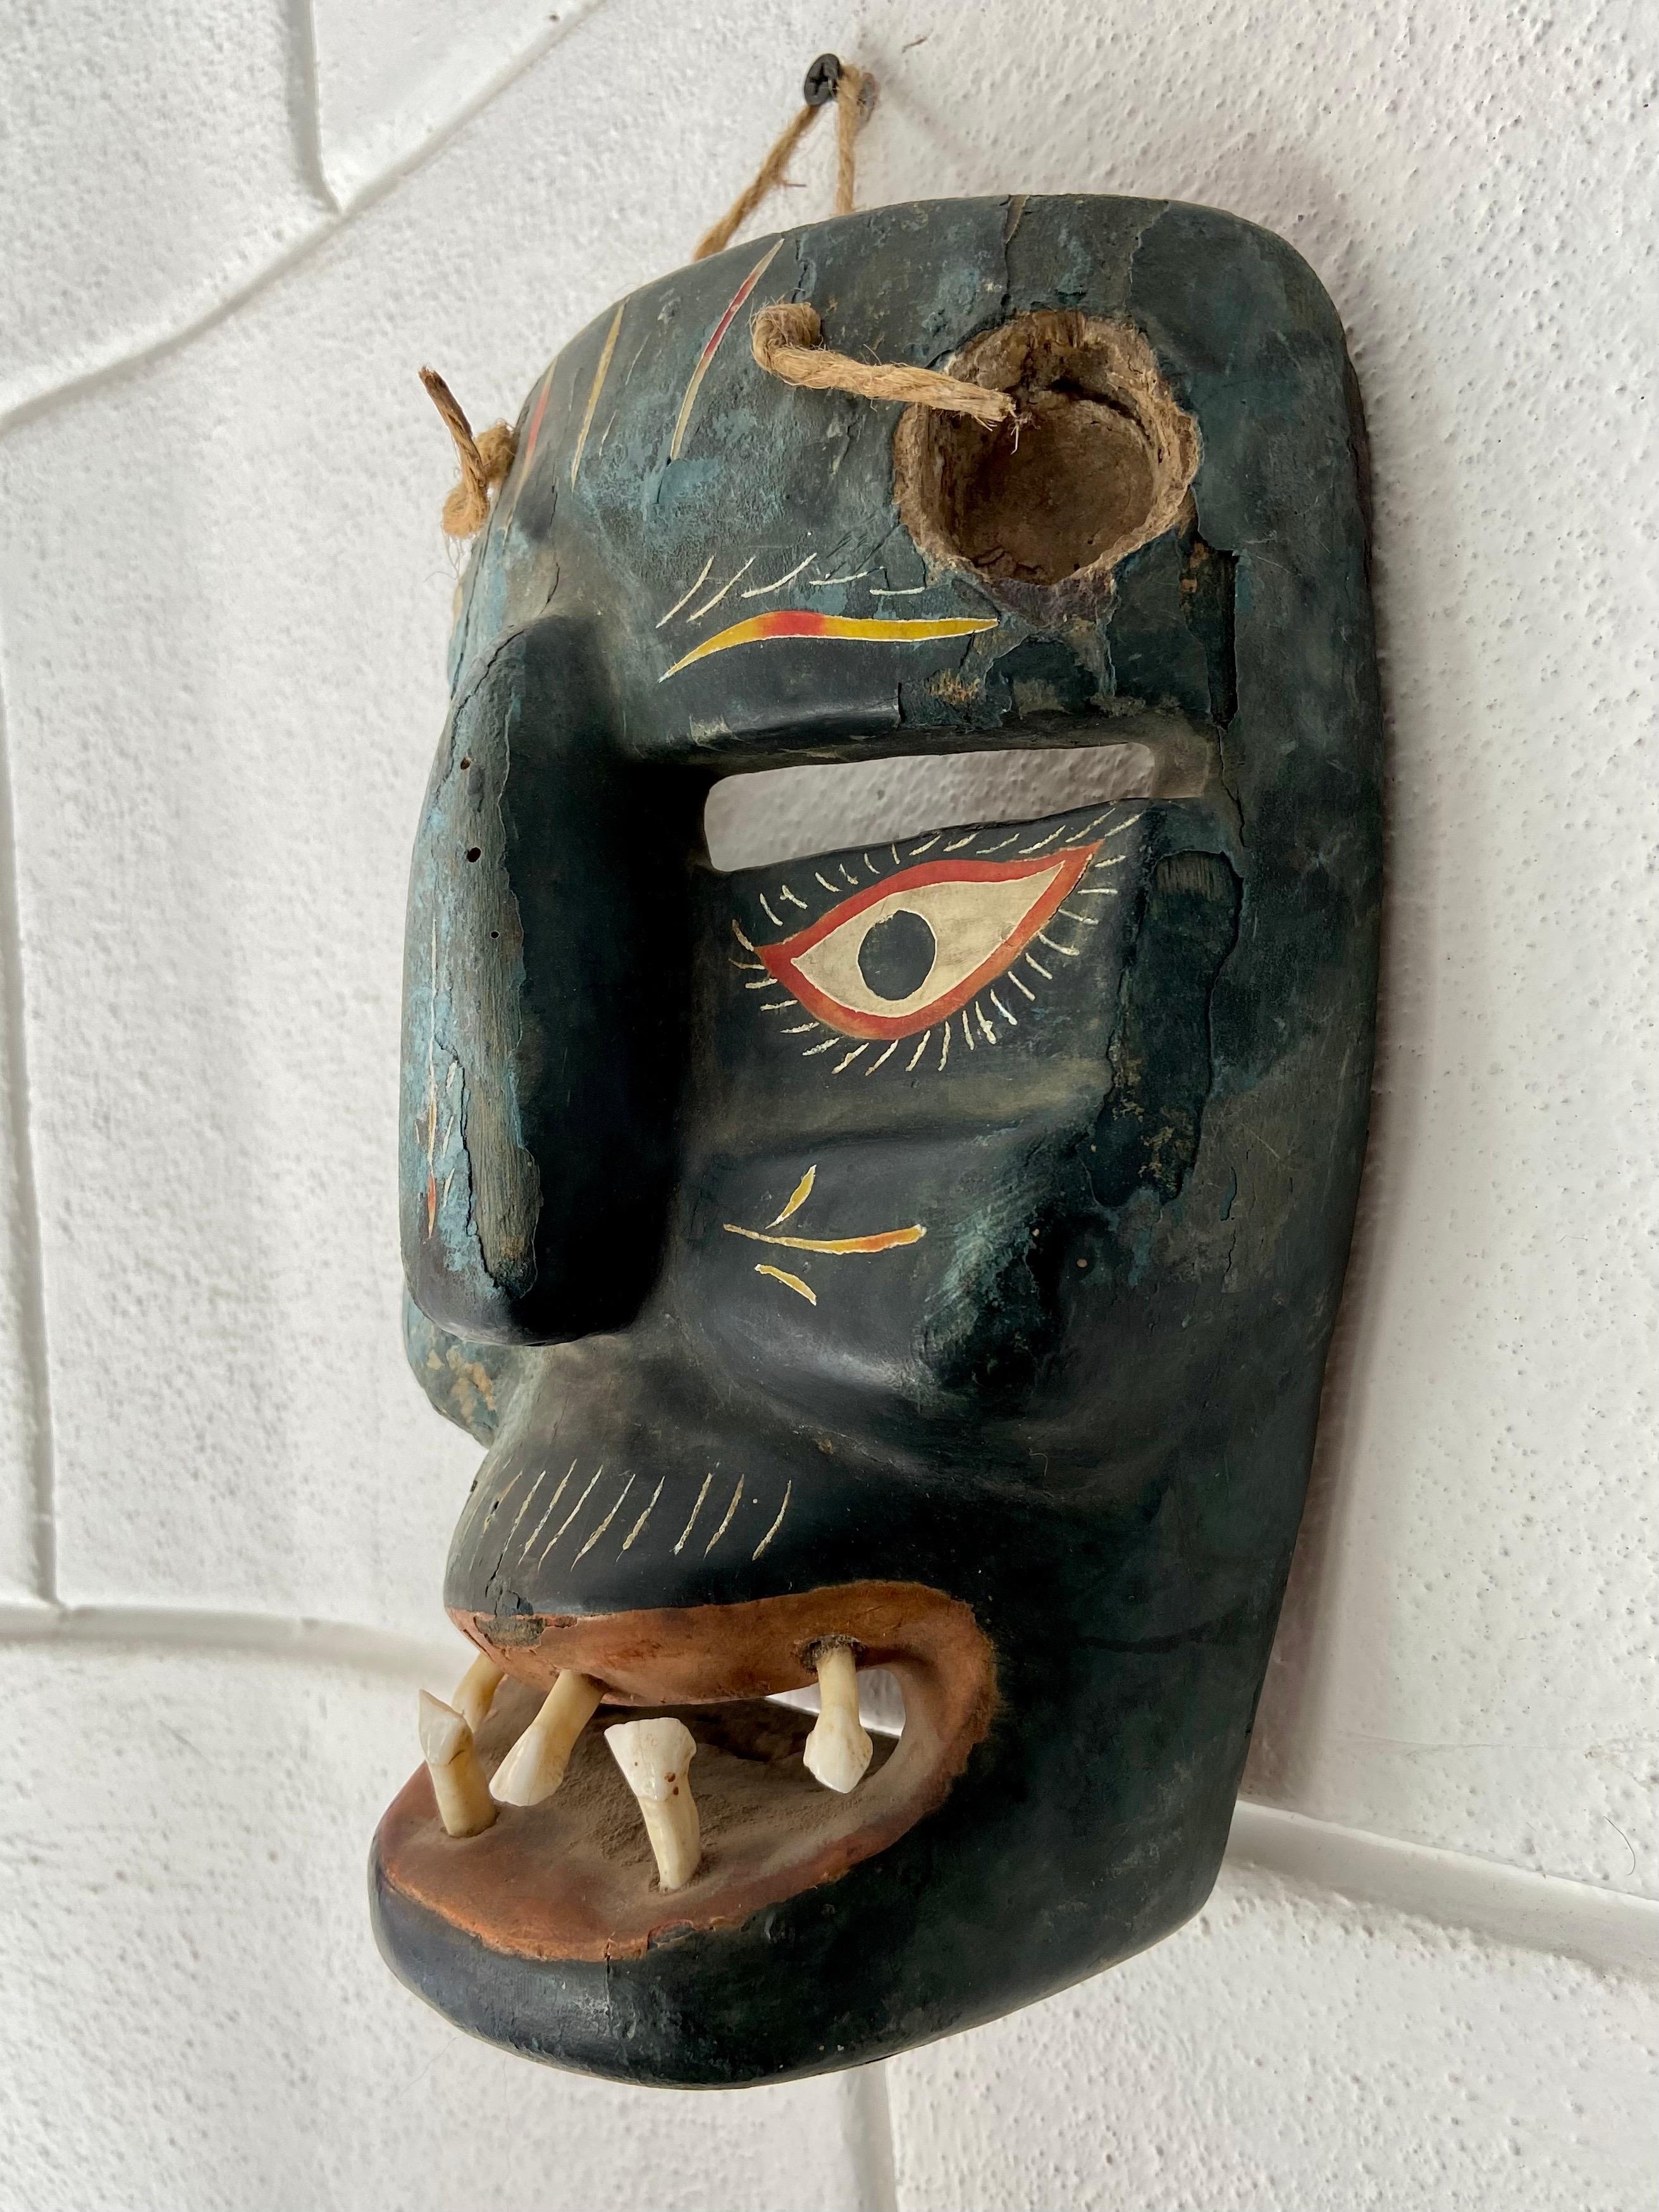 Hand-carved, hardwood ceremonial mask from the Uruapan / Patzcuaro region of Michoacan, Mexico, circa 1960's. This devil mask once seen in representations of the nativity is of a deep blue/grey turquoise and bright, colorful maque inlays clearly